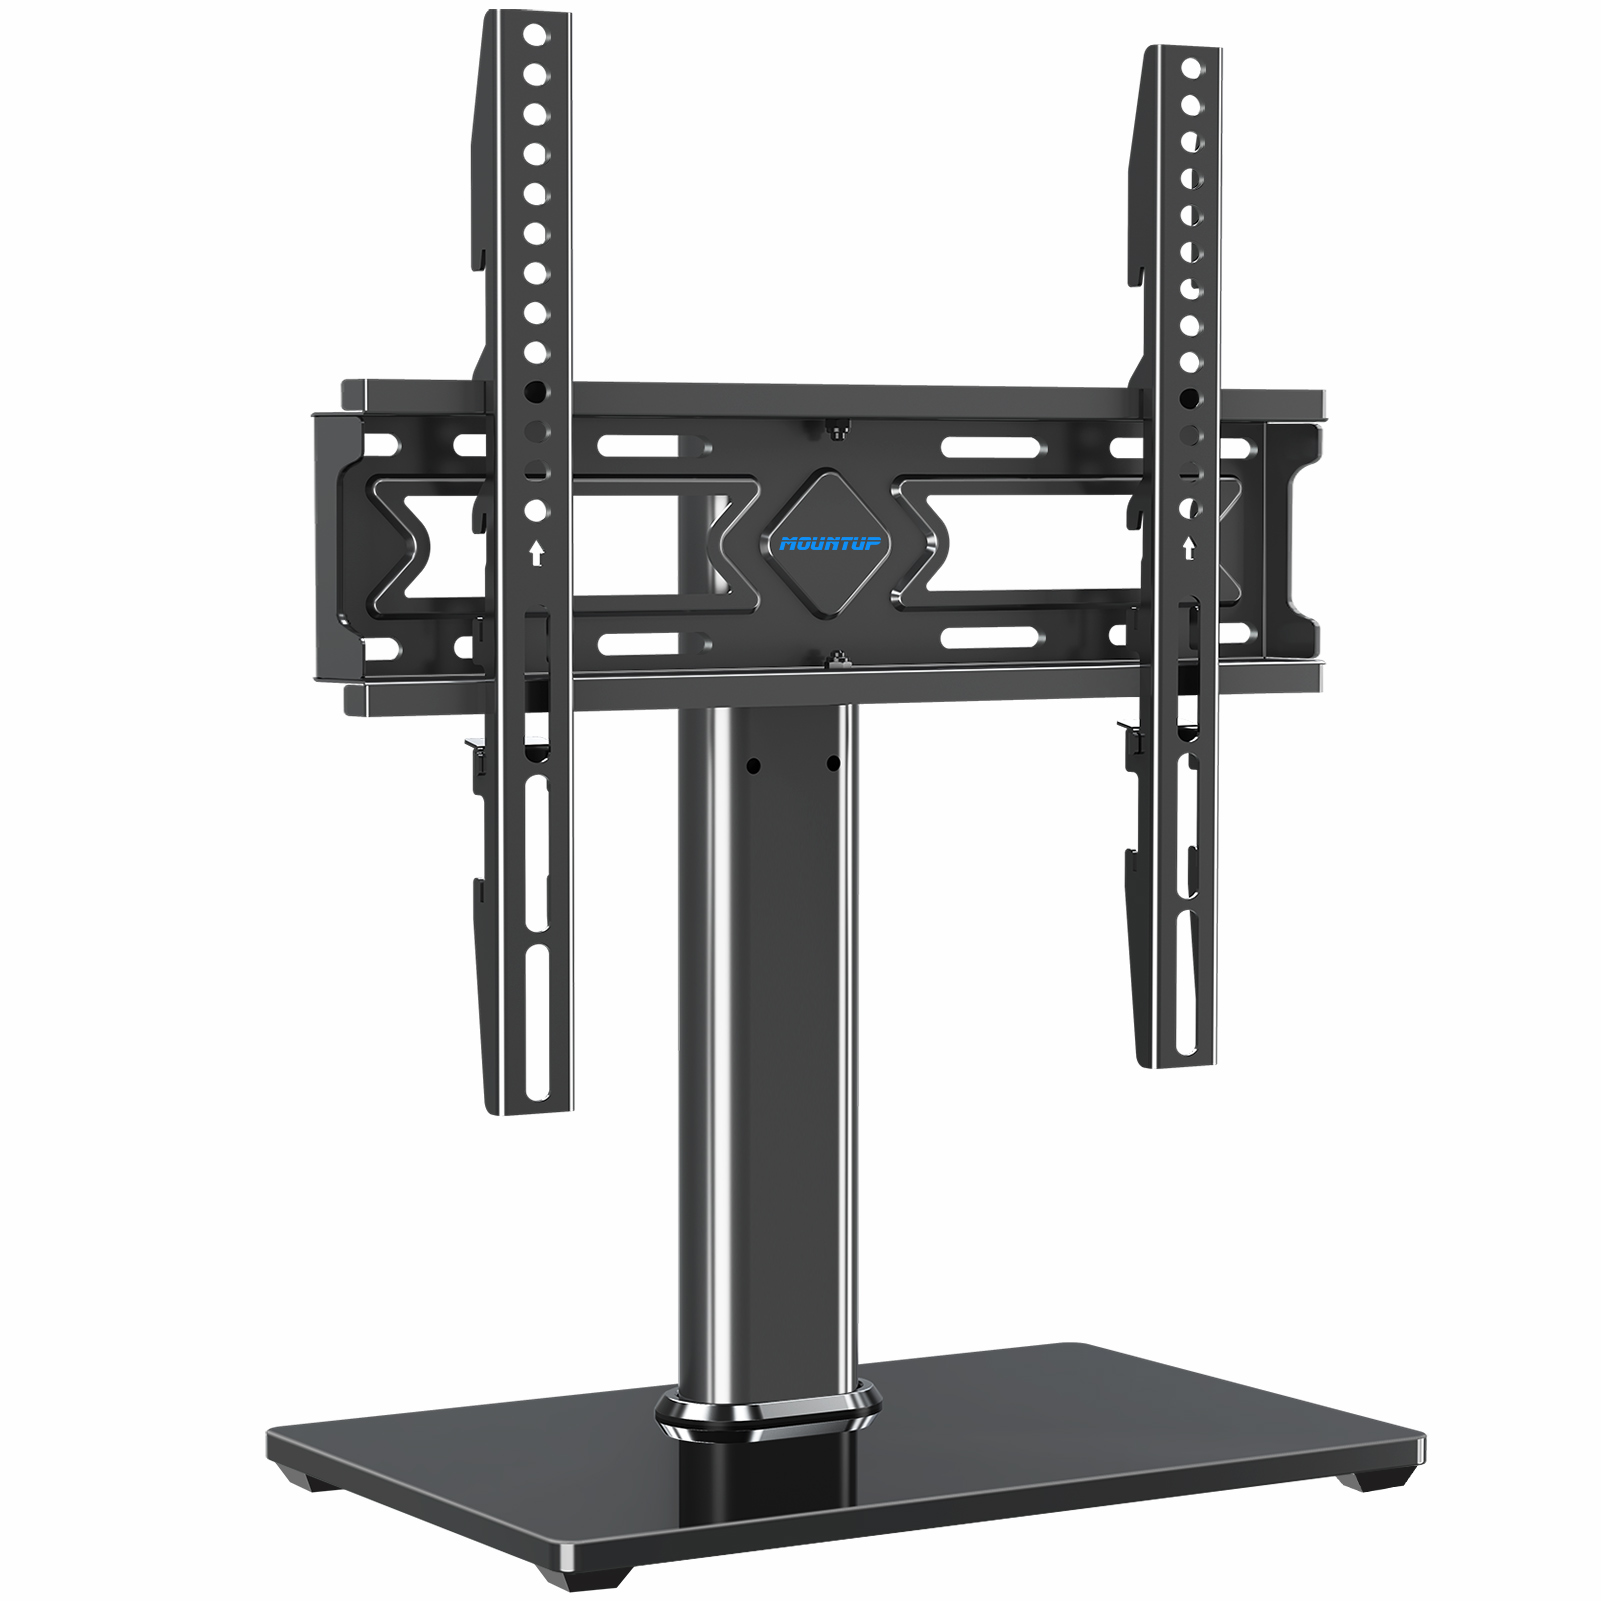 MOUNTUP Universal Swivel TV Stand for 37–55-inch TVs $24.97 with Clip Coupon + Free Shipping